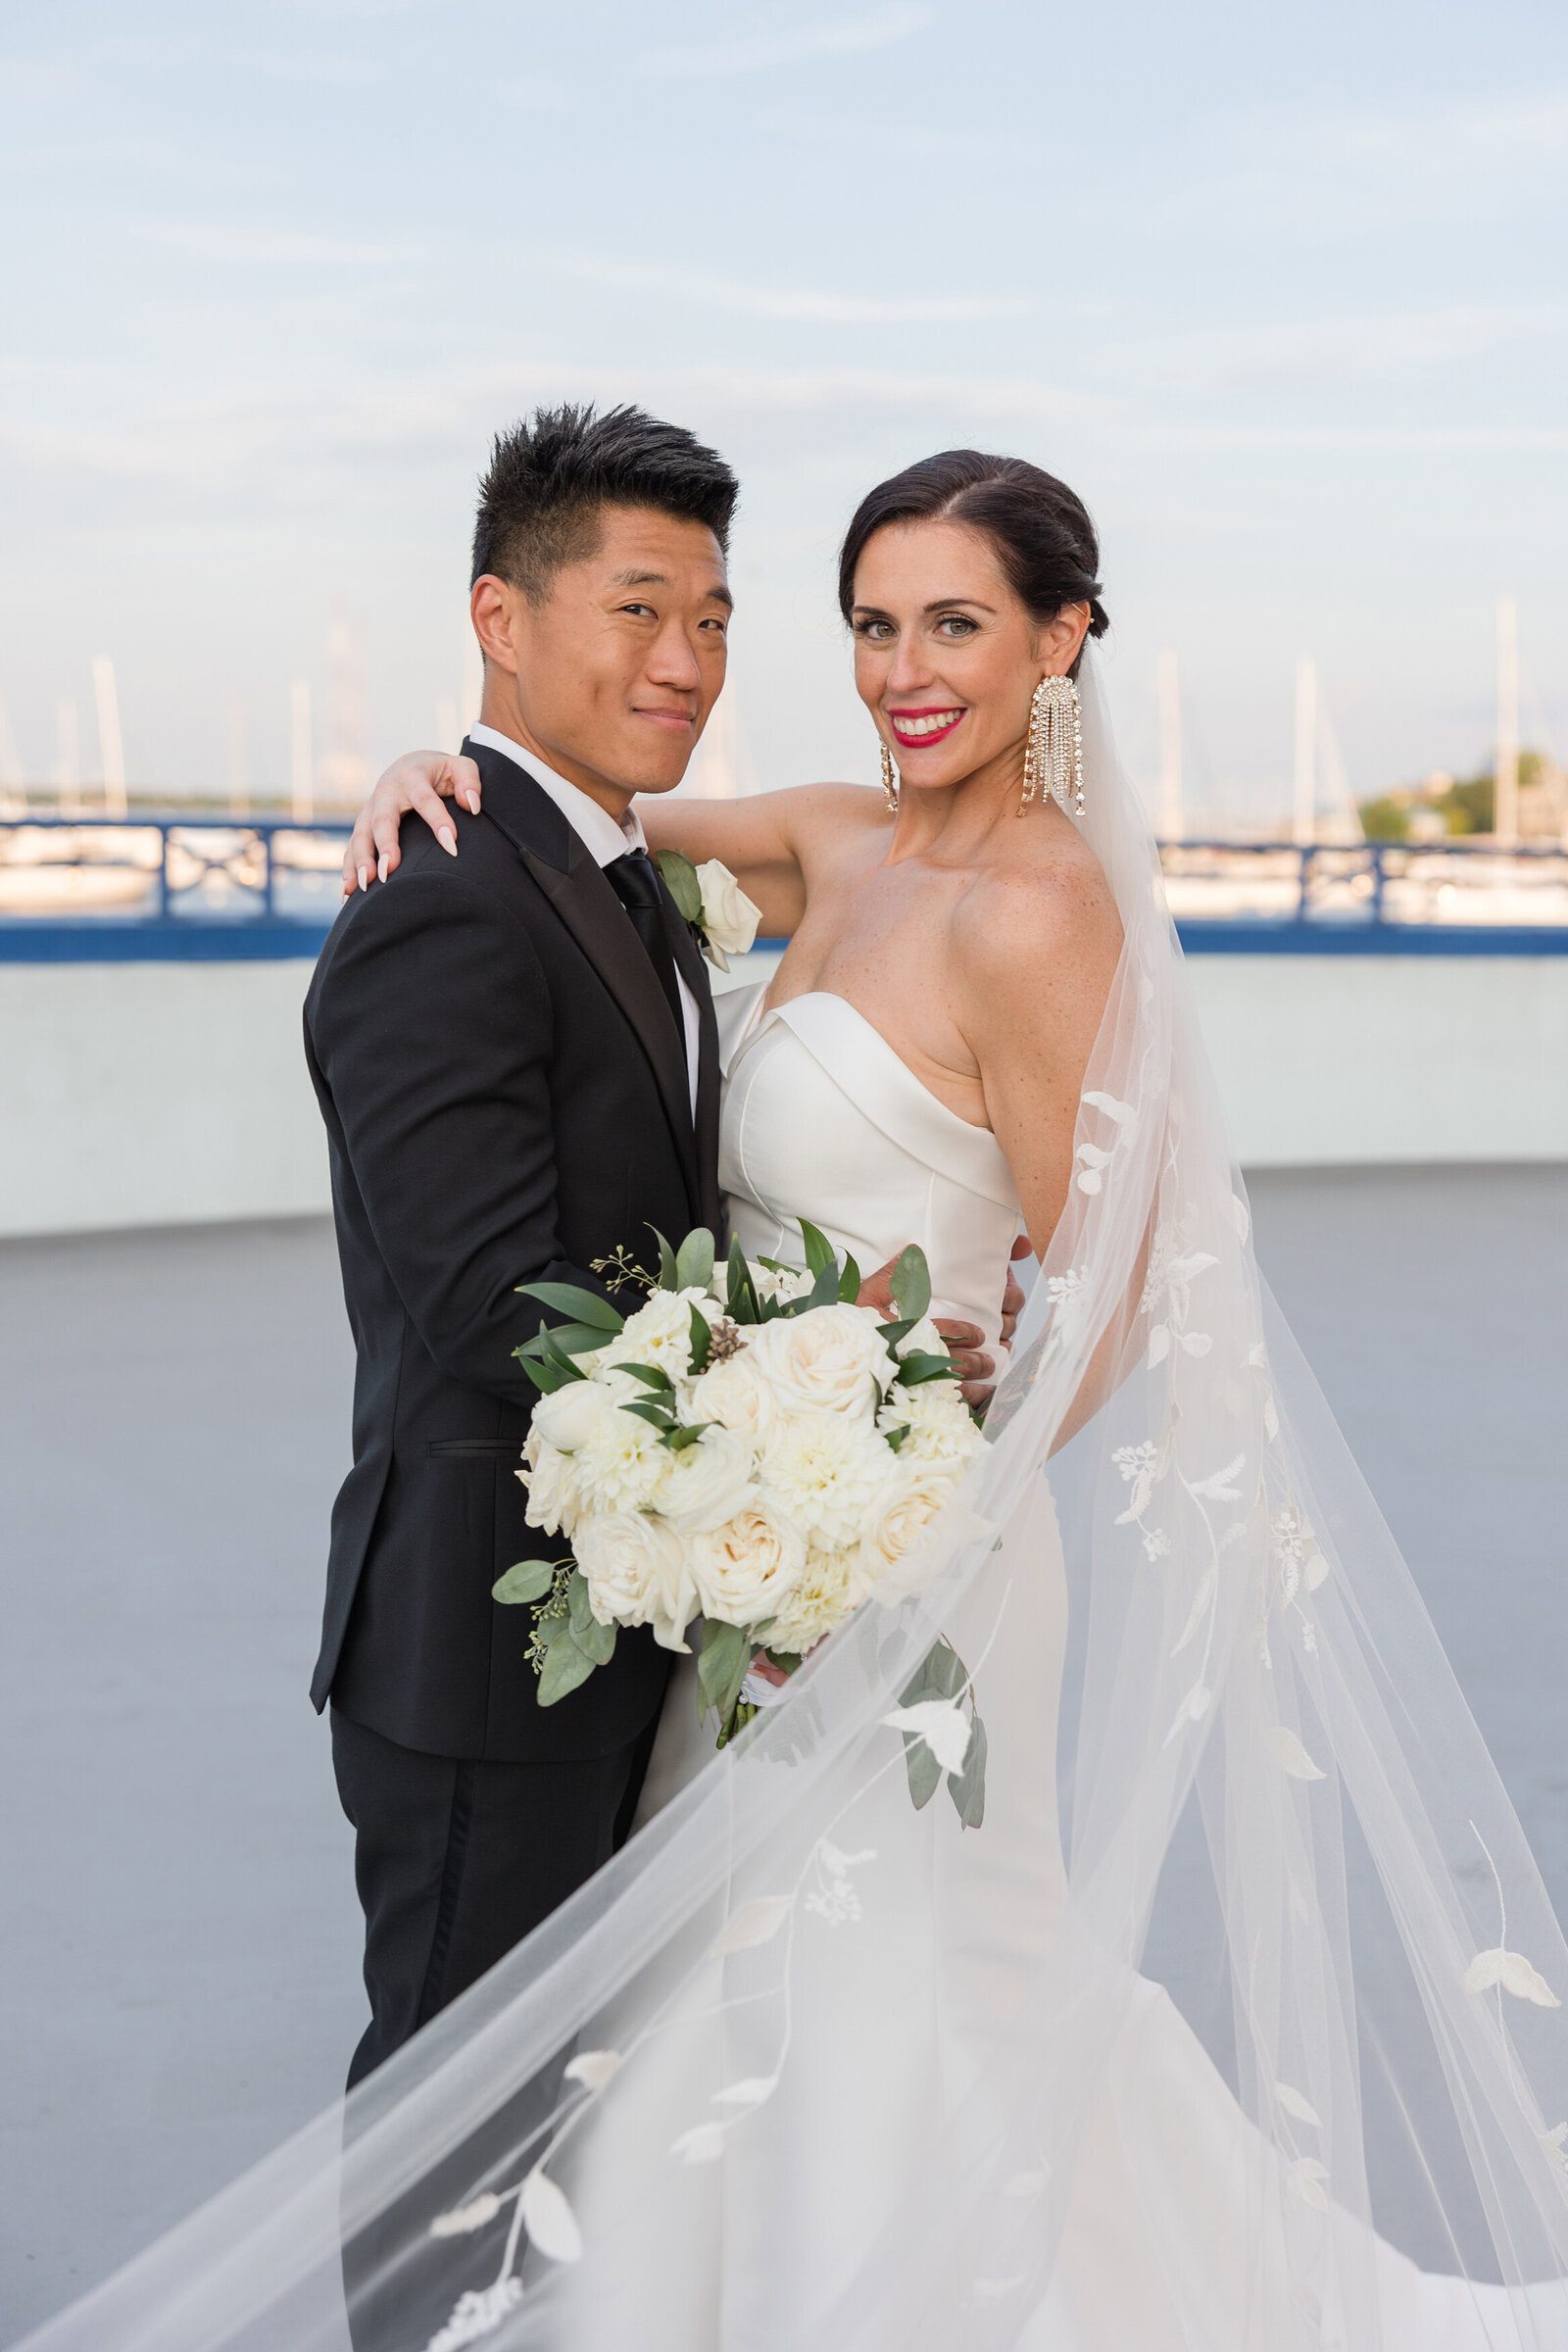 Annapolis Waterfront Hotel wedding photo by Maryland photographer Christa Rae Photography